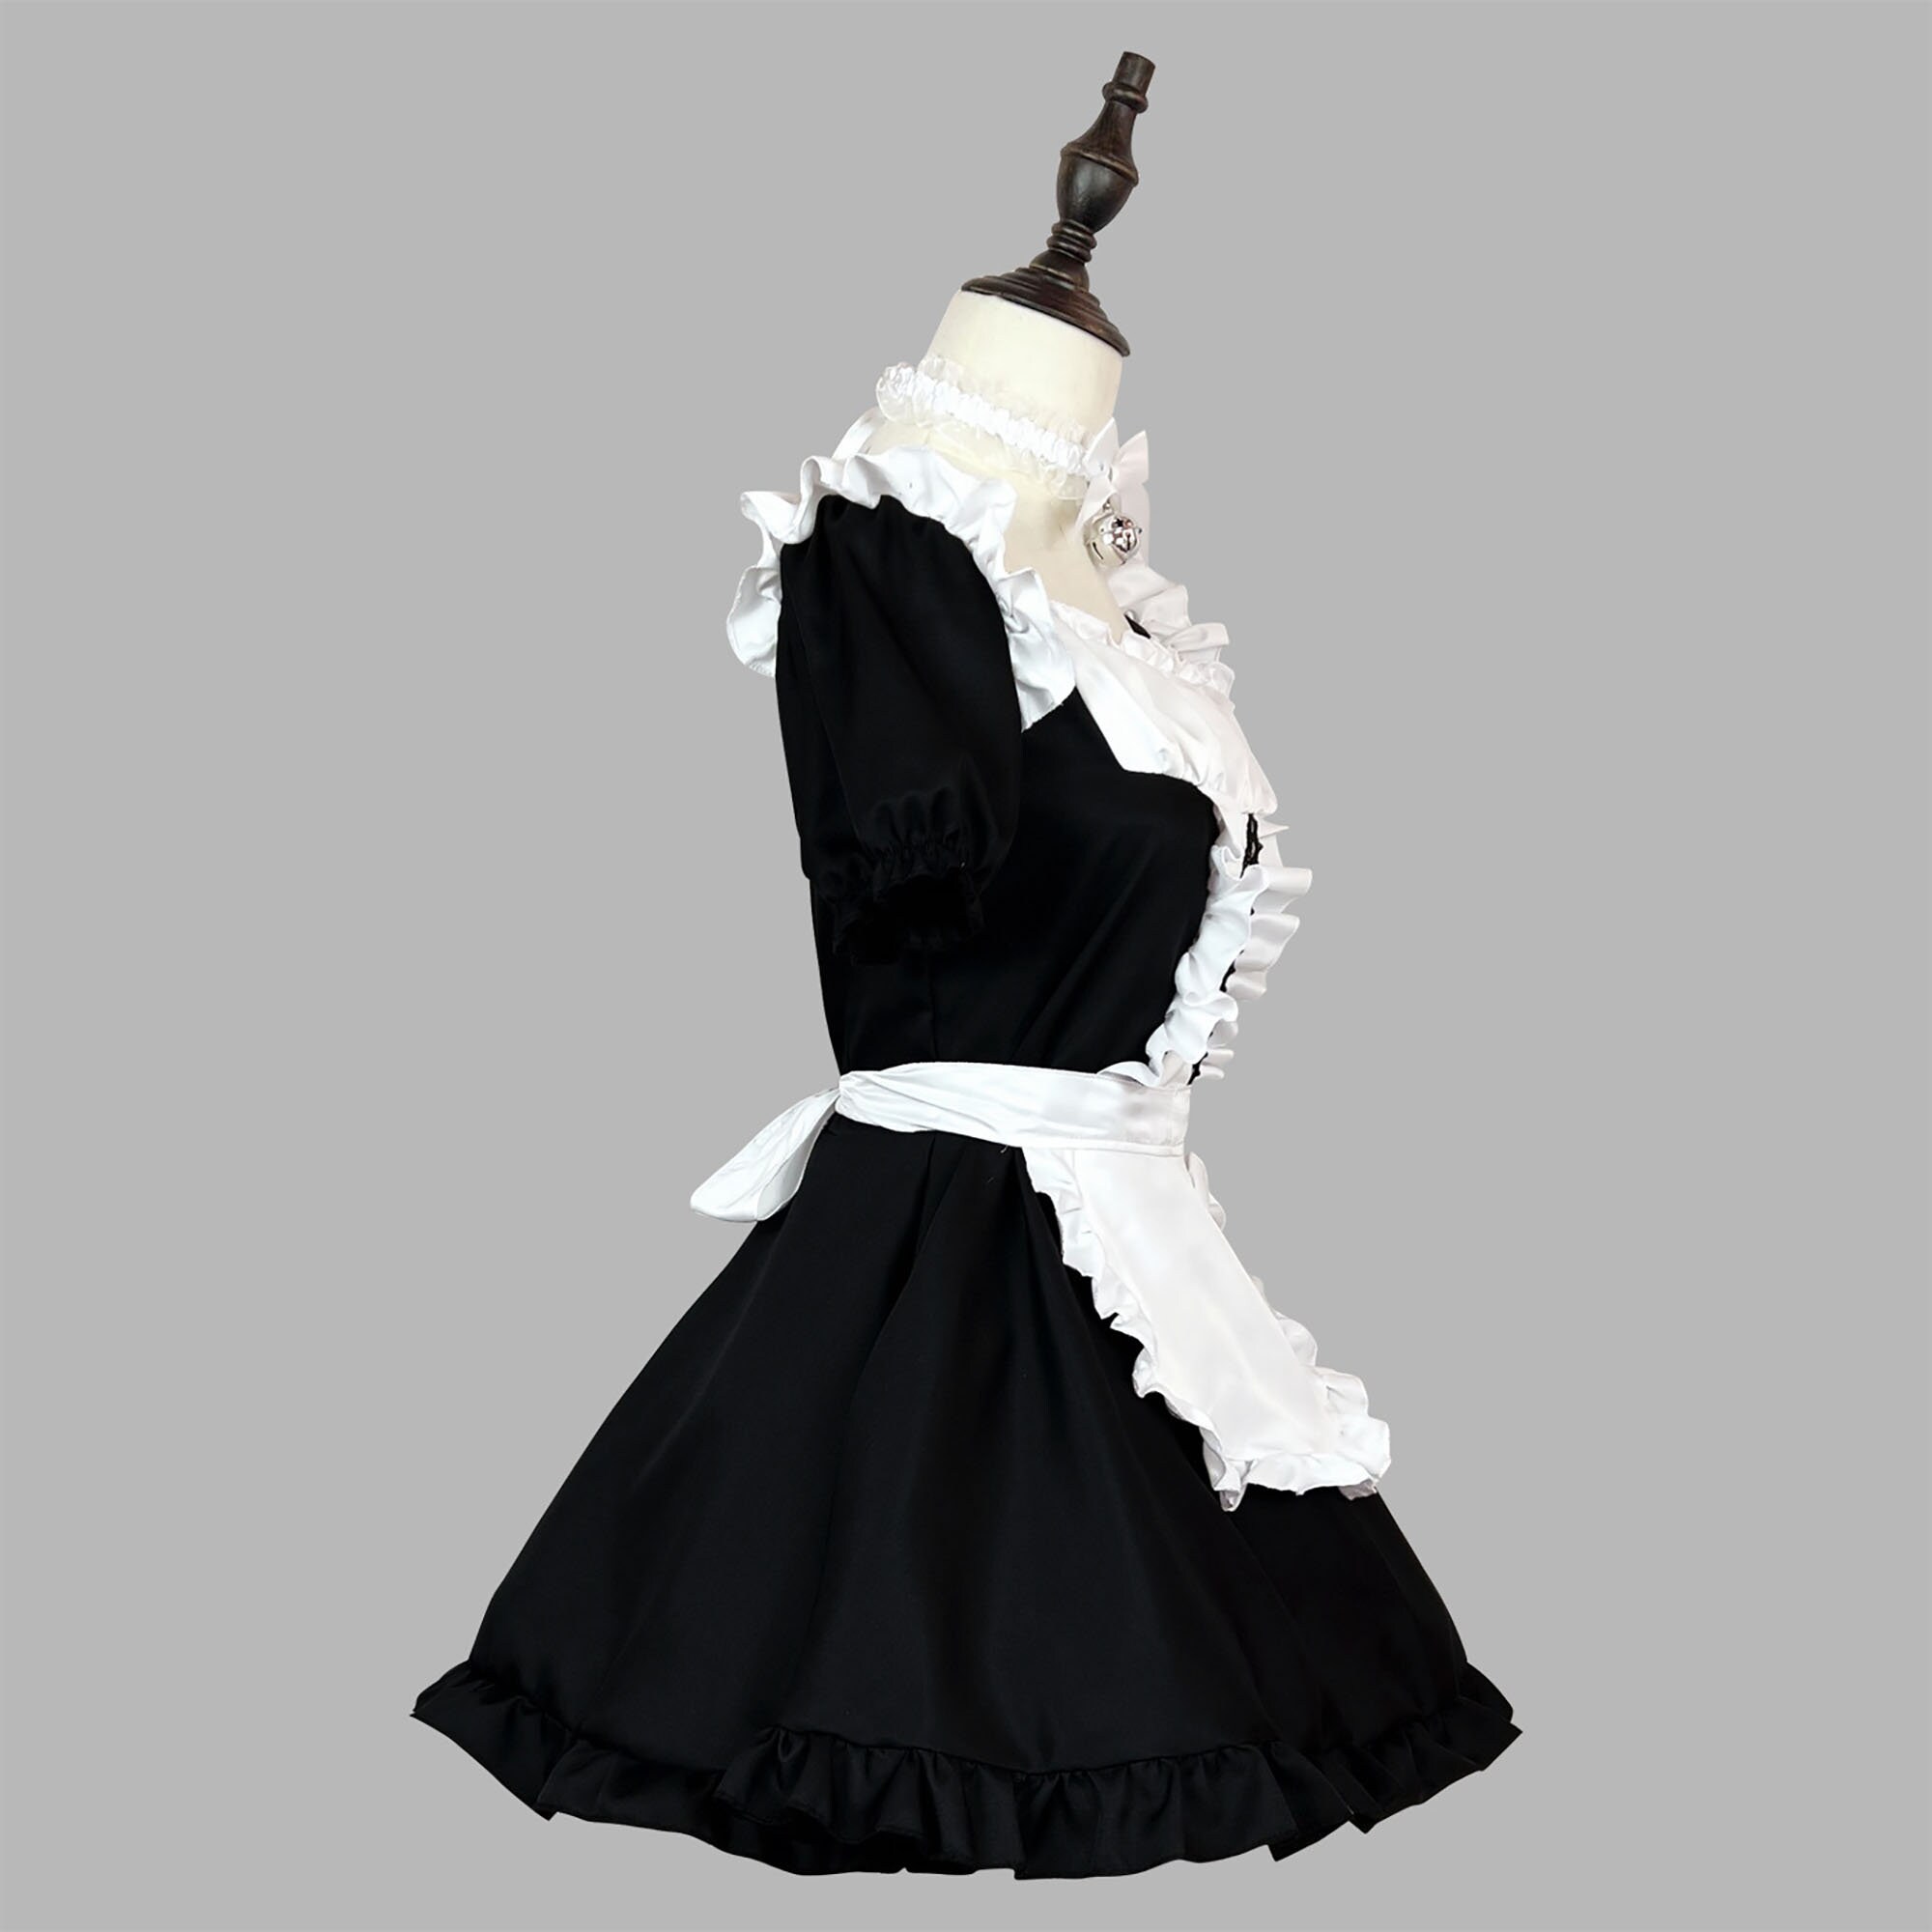 Details about   Cute Lolita Maid Cosplay Japanese Anime Uniform Dress Costume Outfit Plus Size